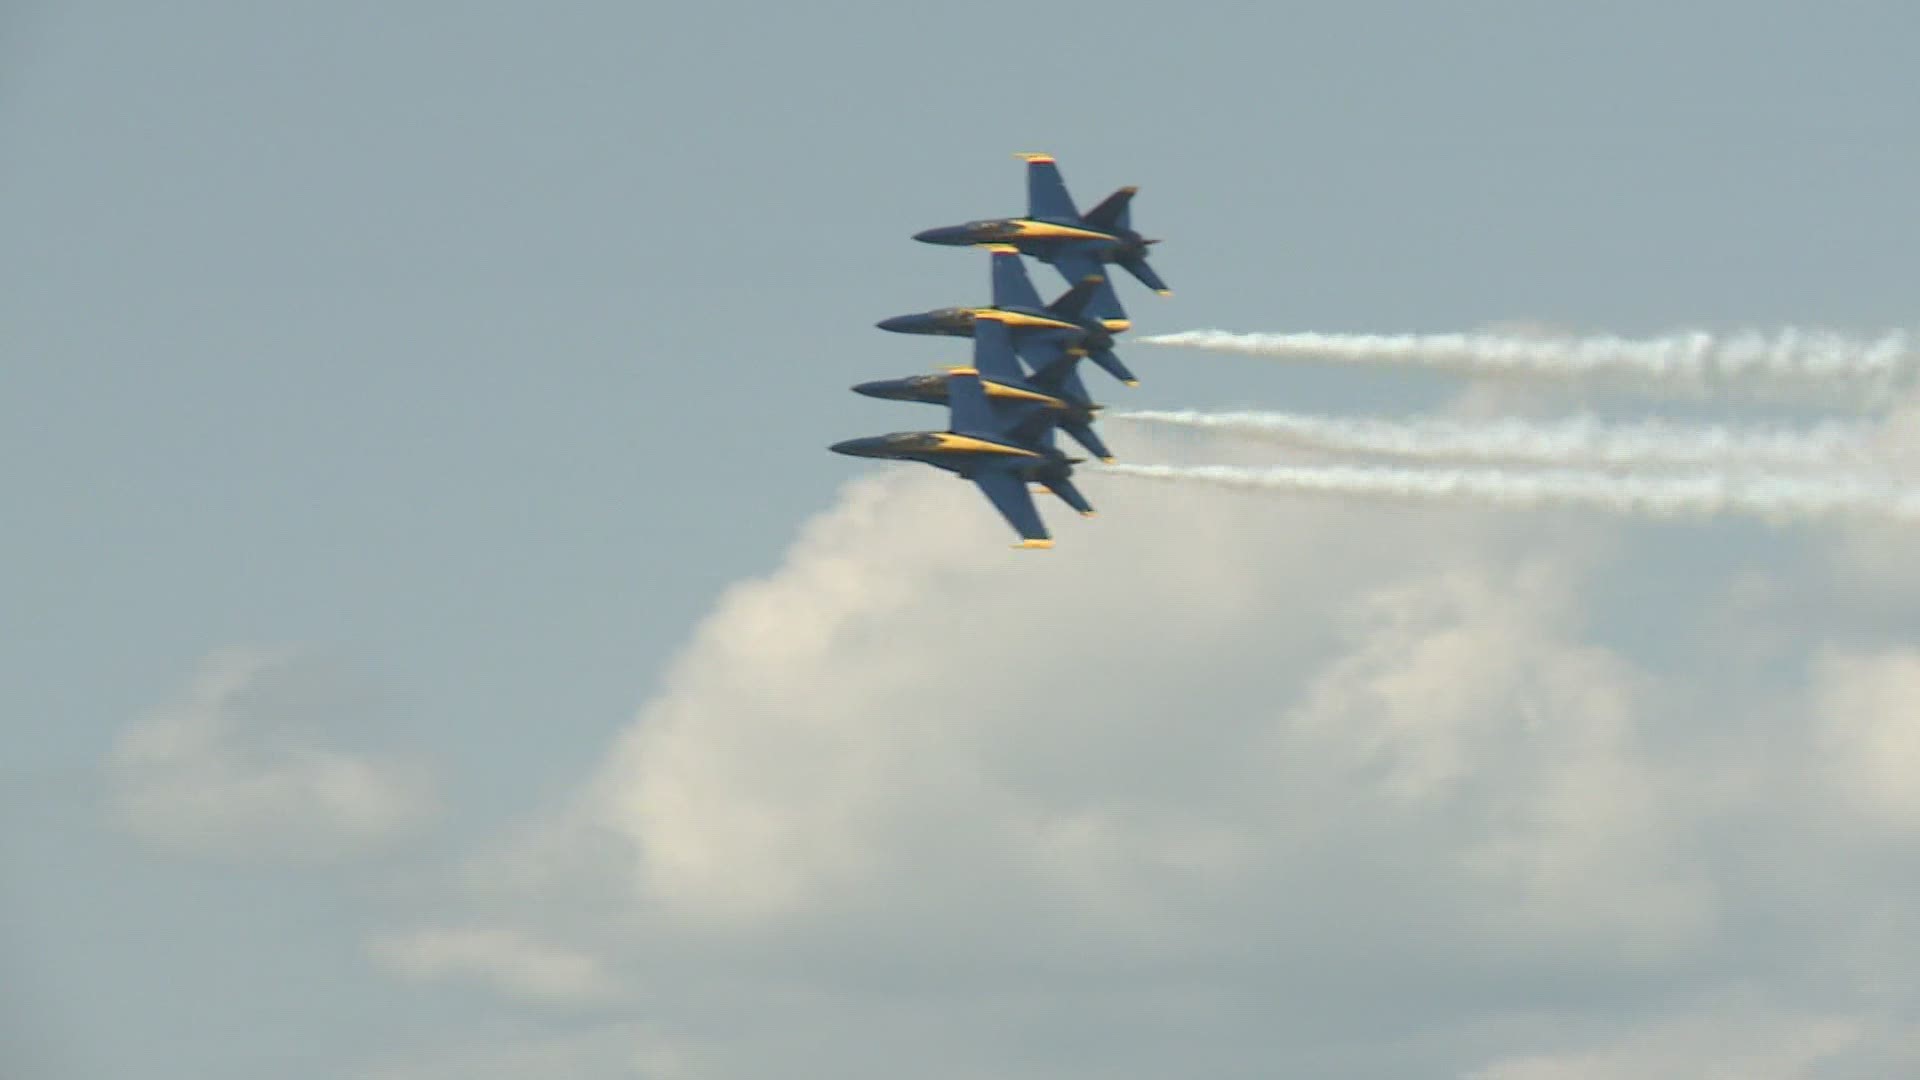 The Blue Angels will fly over Brunswick, Maine, on Labor day weekend for the first time since 2017